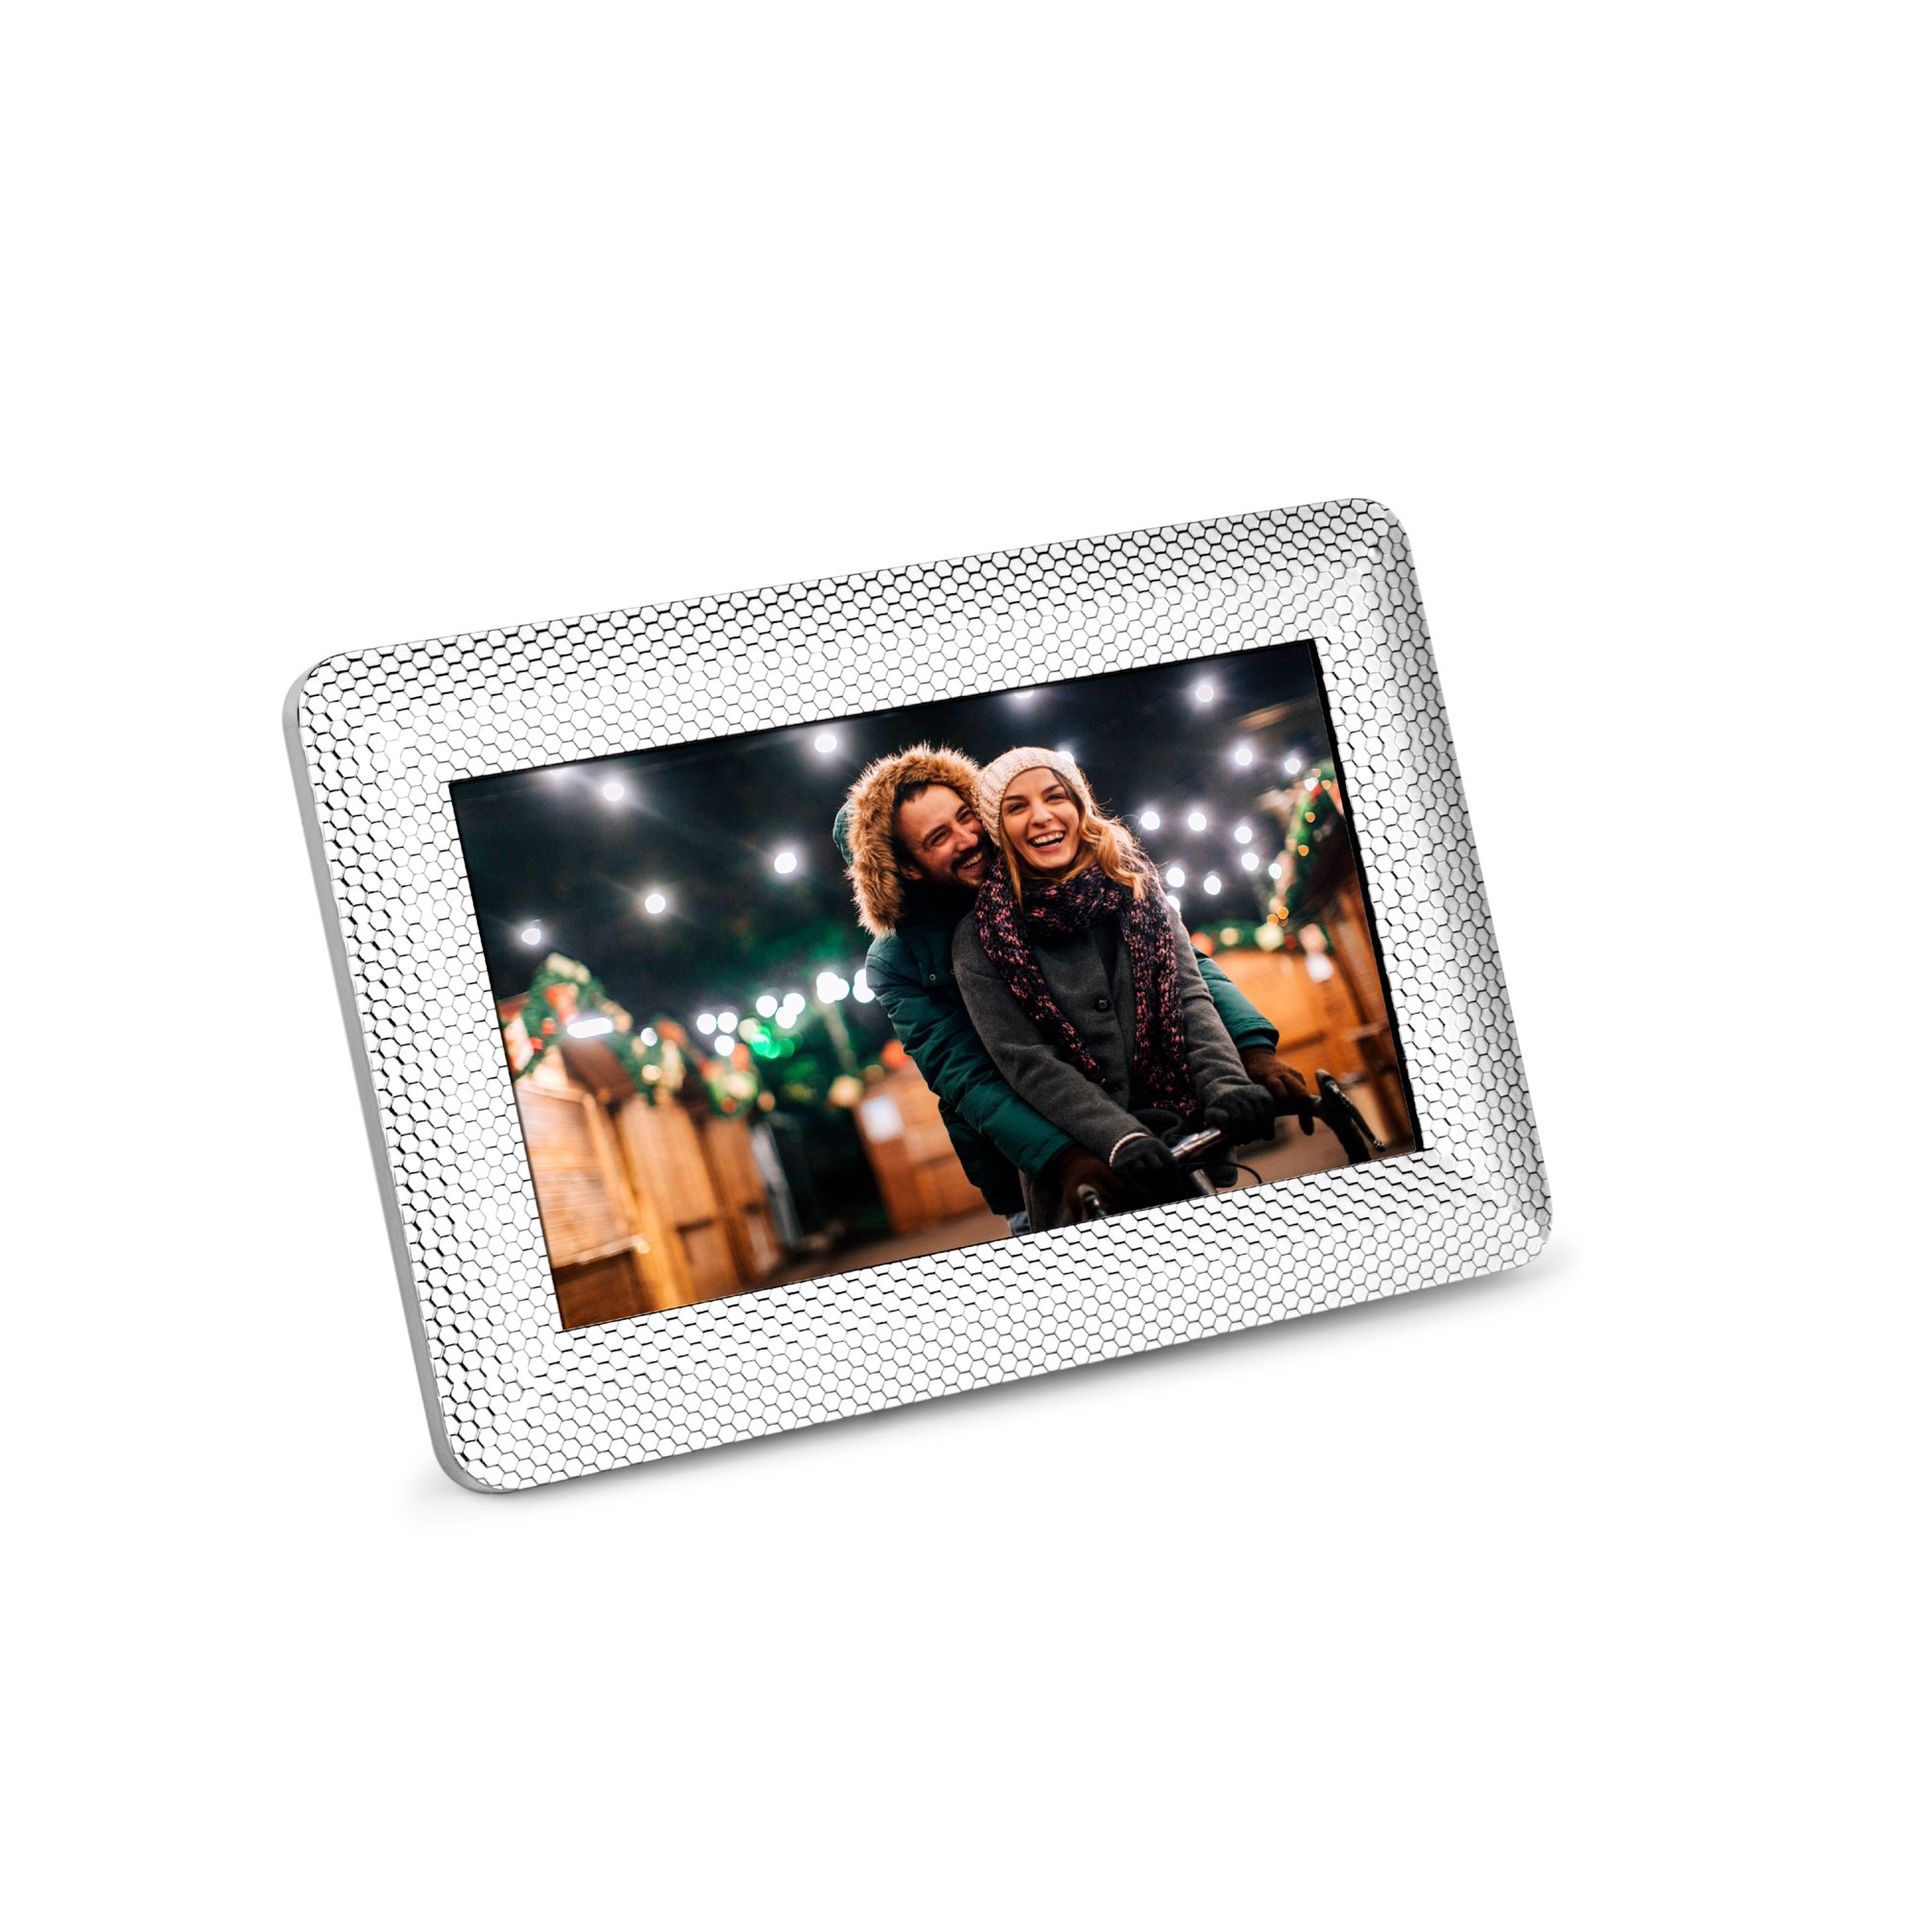 7” DigitaPhoto Frame with Decorative Silver Metal Frame